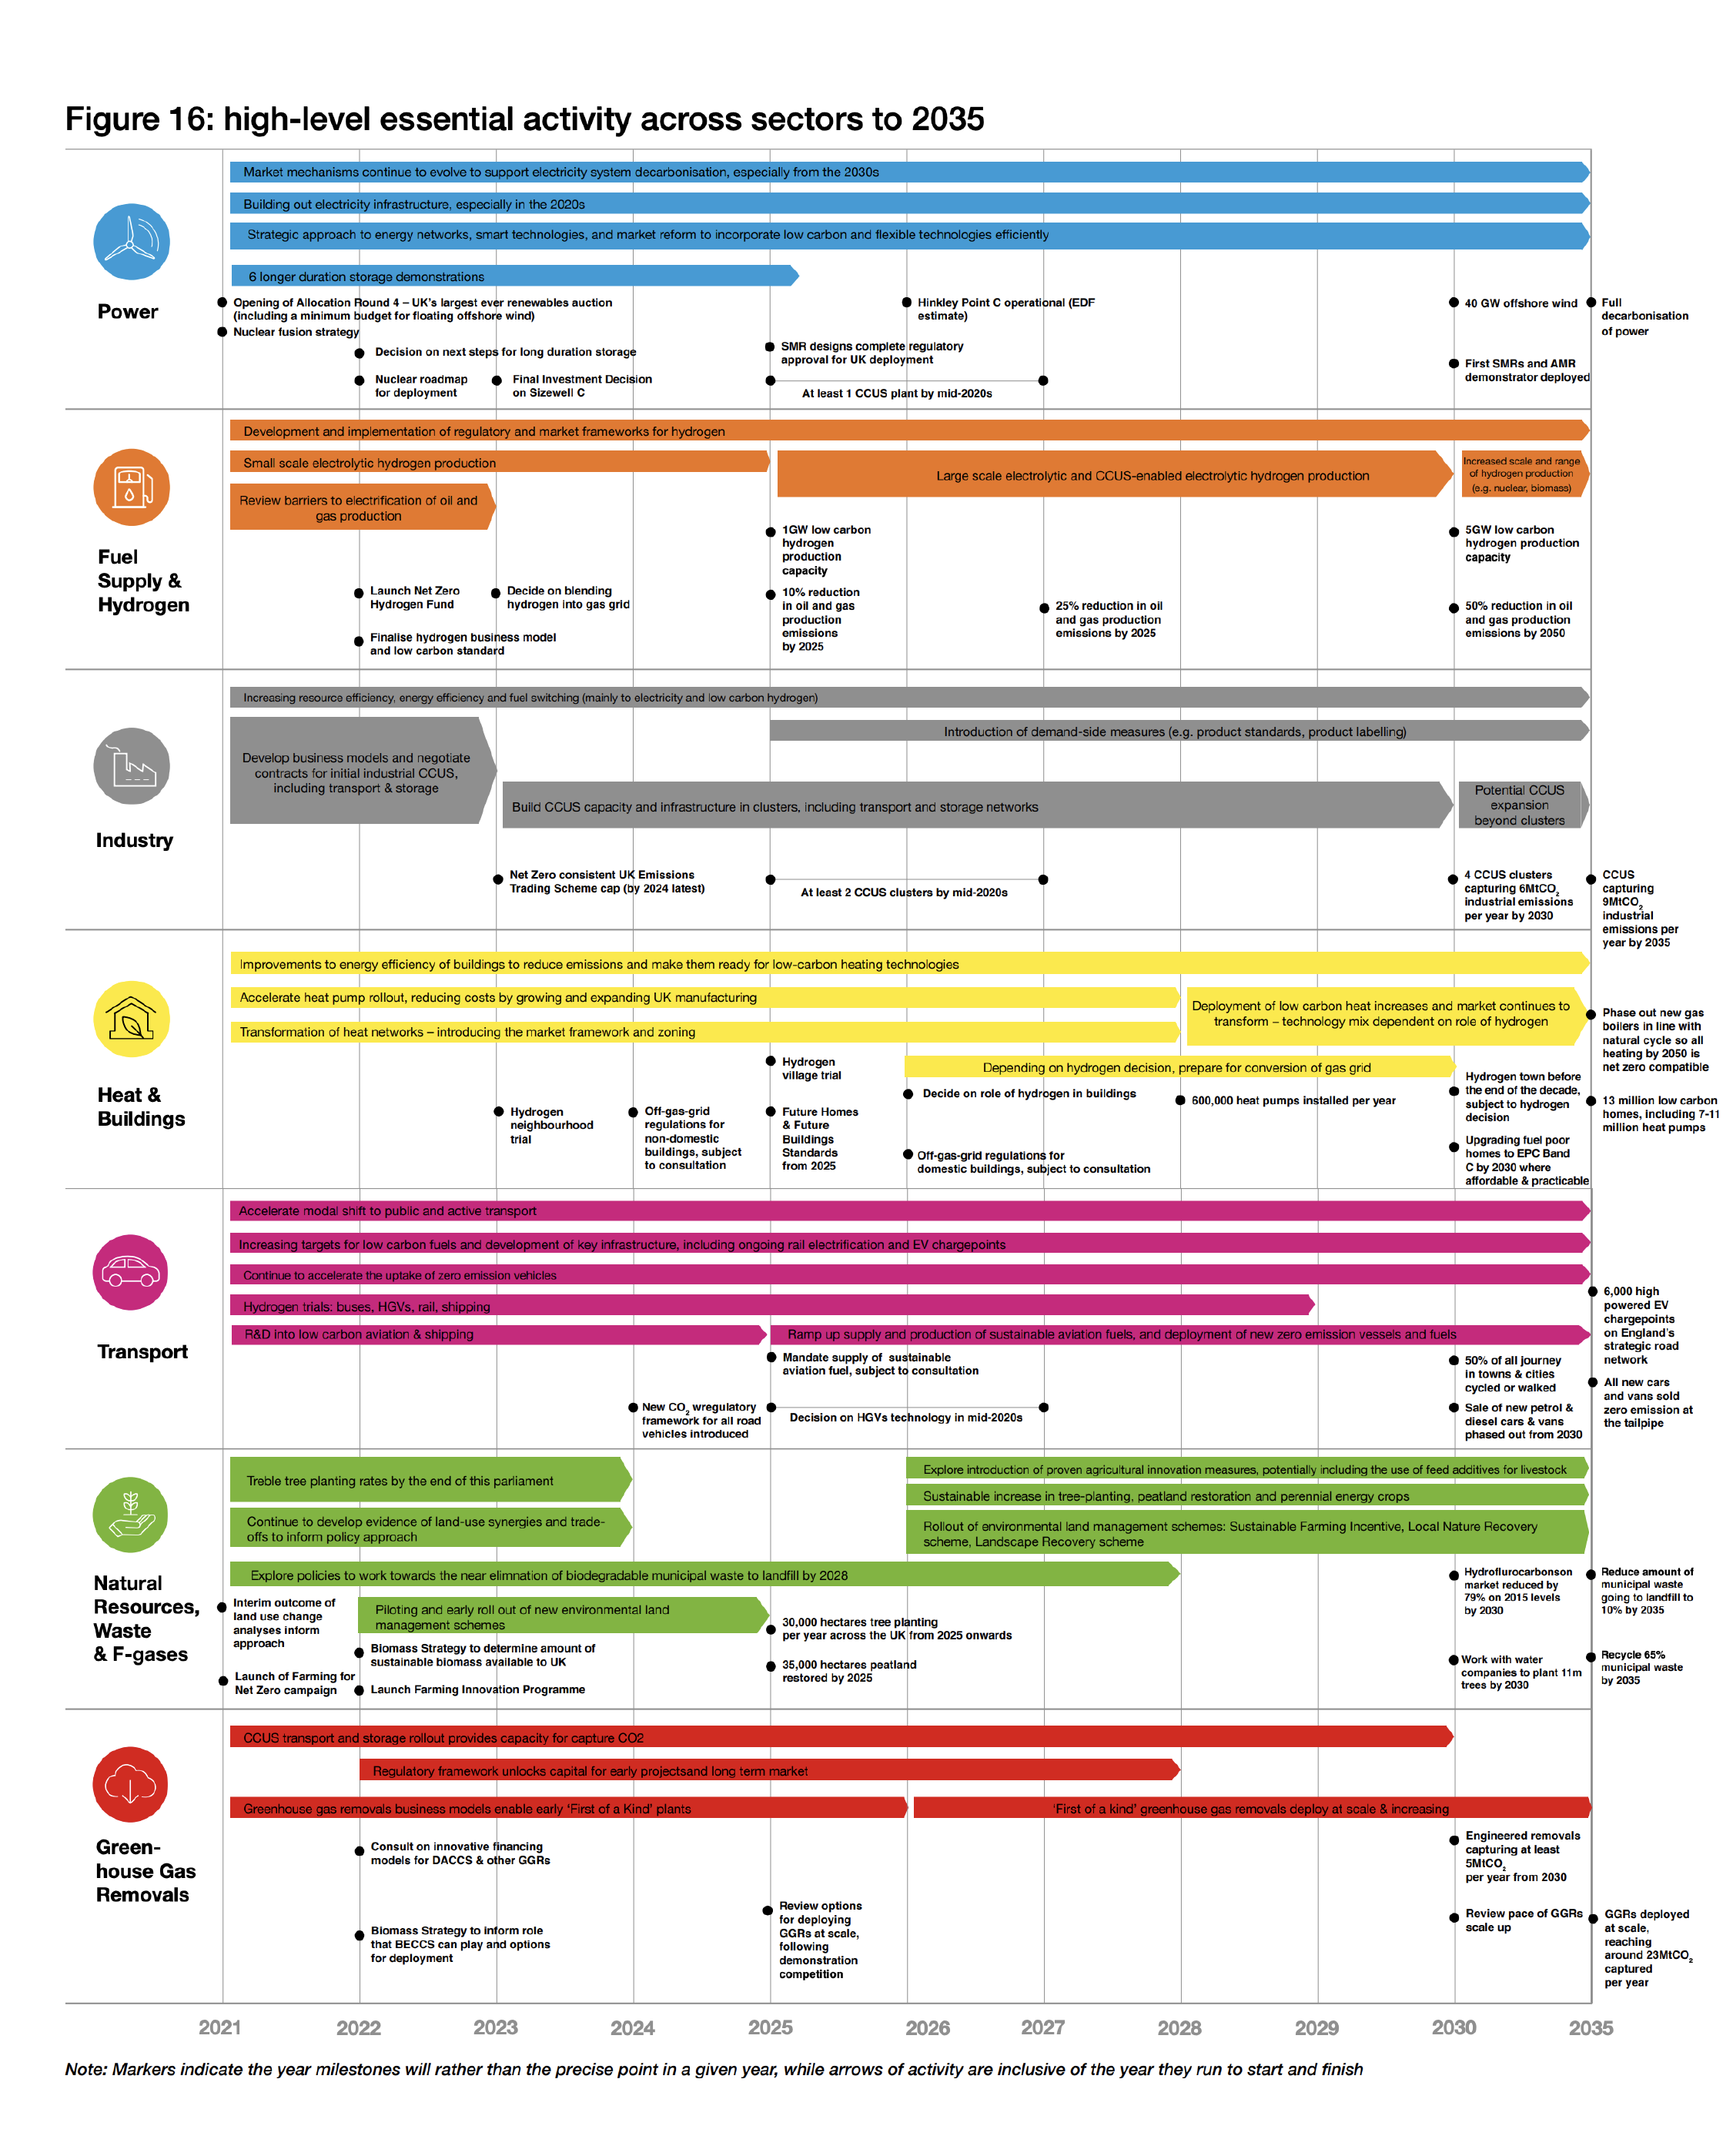 Timelines showing “essential activity across sectors” in the government’s pathway out to 2035. Source: Net-zero strategy